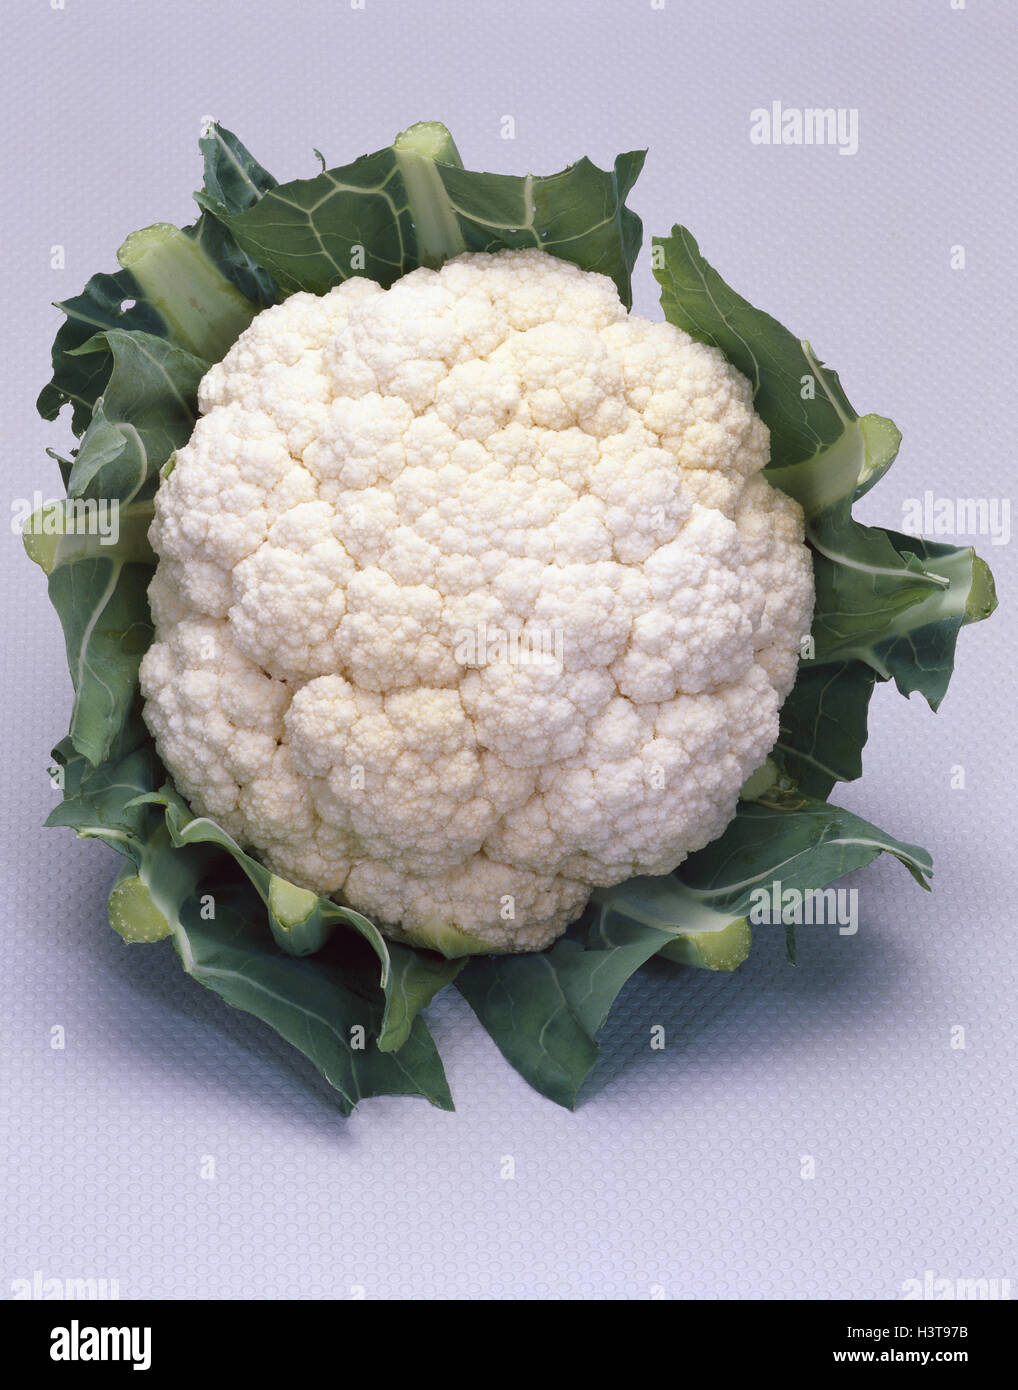 Cauliflower, Brassica oleracea cauliflower, cauliflower, Brassica oleracea var. botrytis, vegetable plant, cabbage, cabbage, nutrition, healthy, vitamins, vegetables, studio, product photography, only Stock Photo